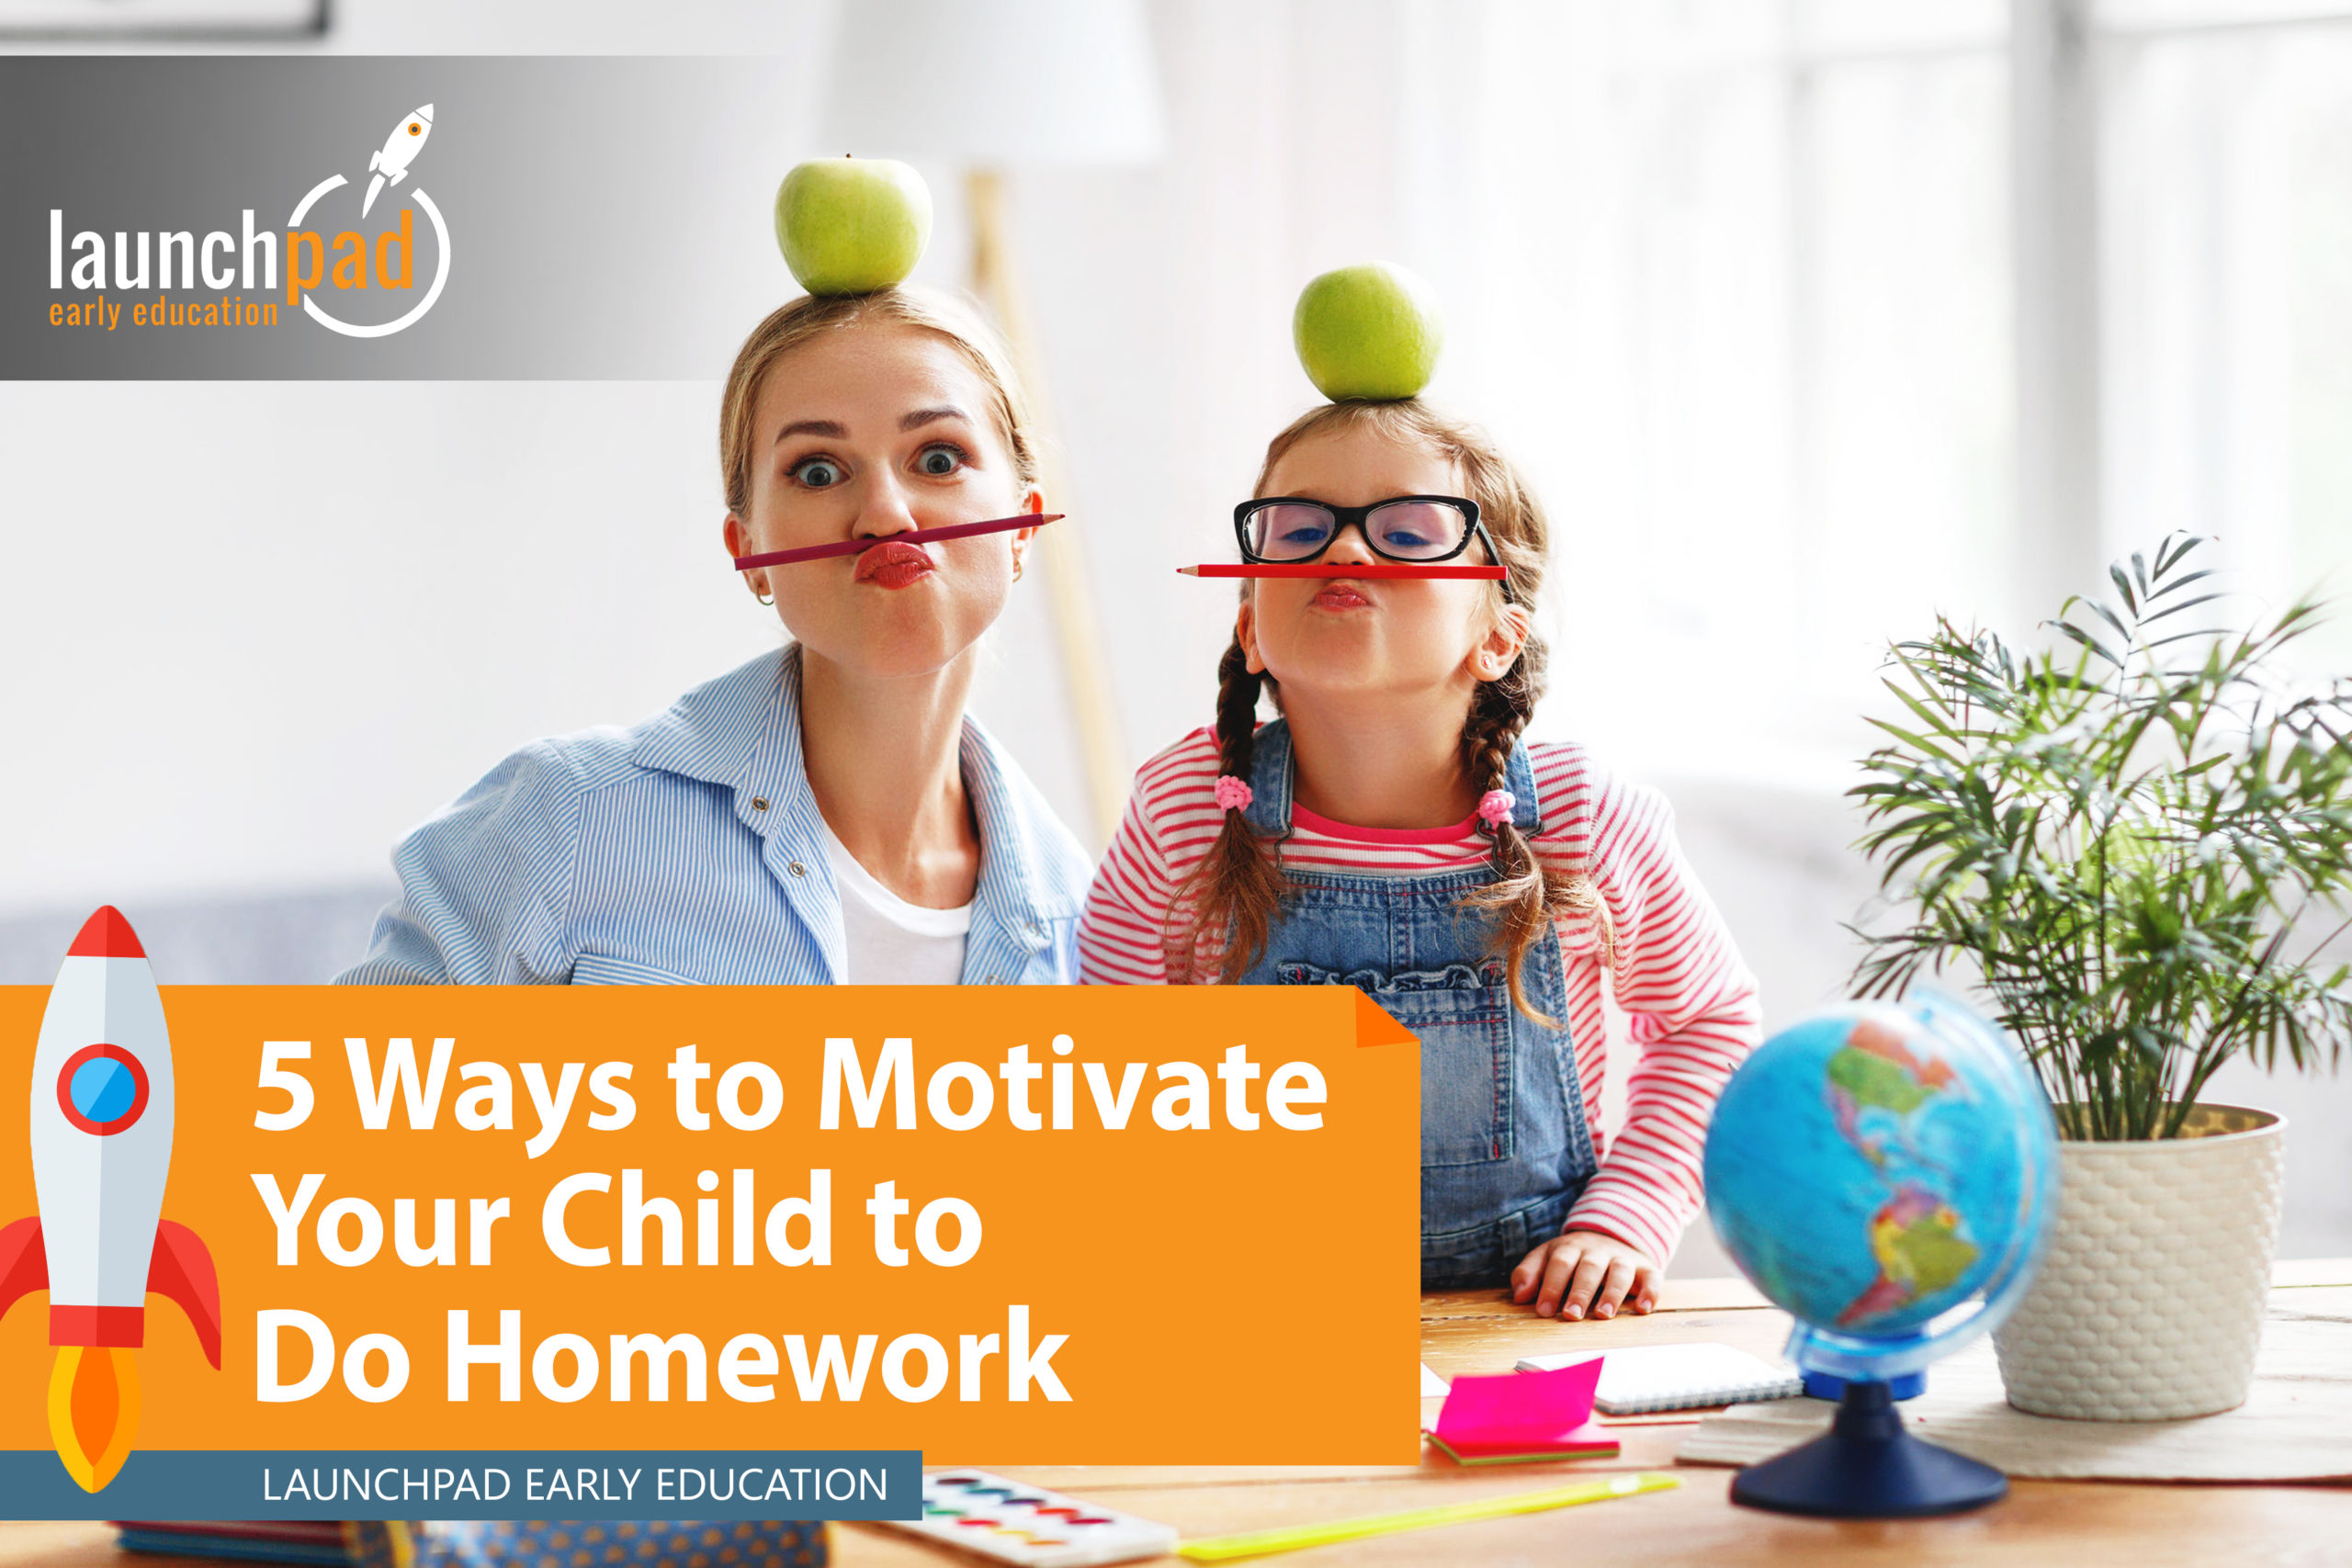 5 ways to motivate your child to do homework